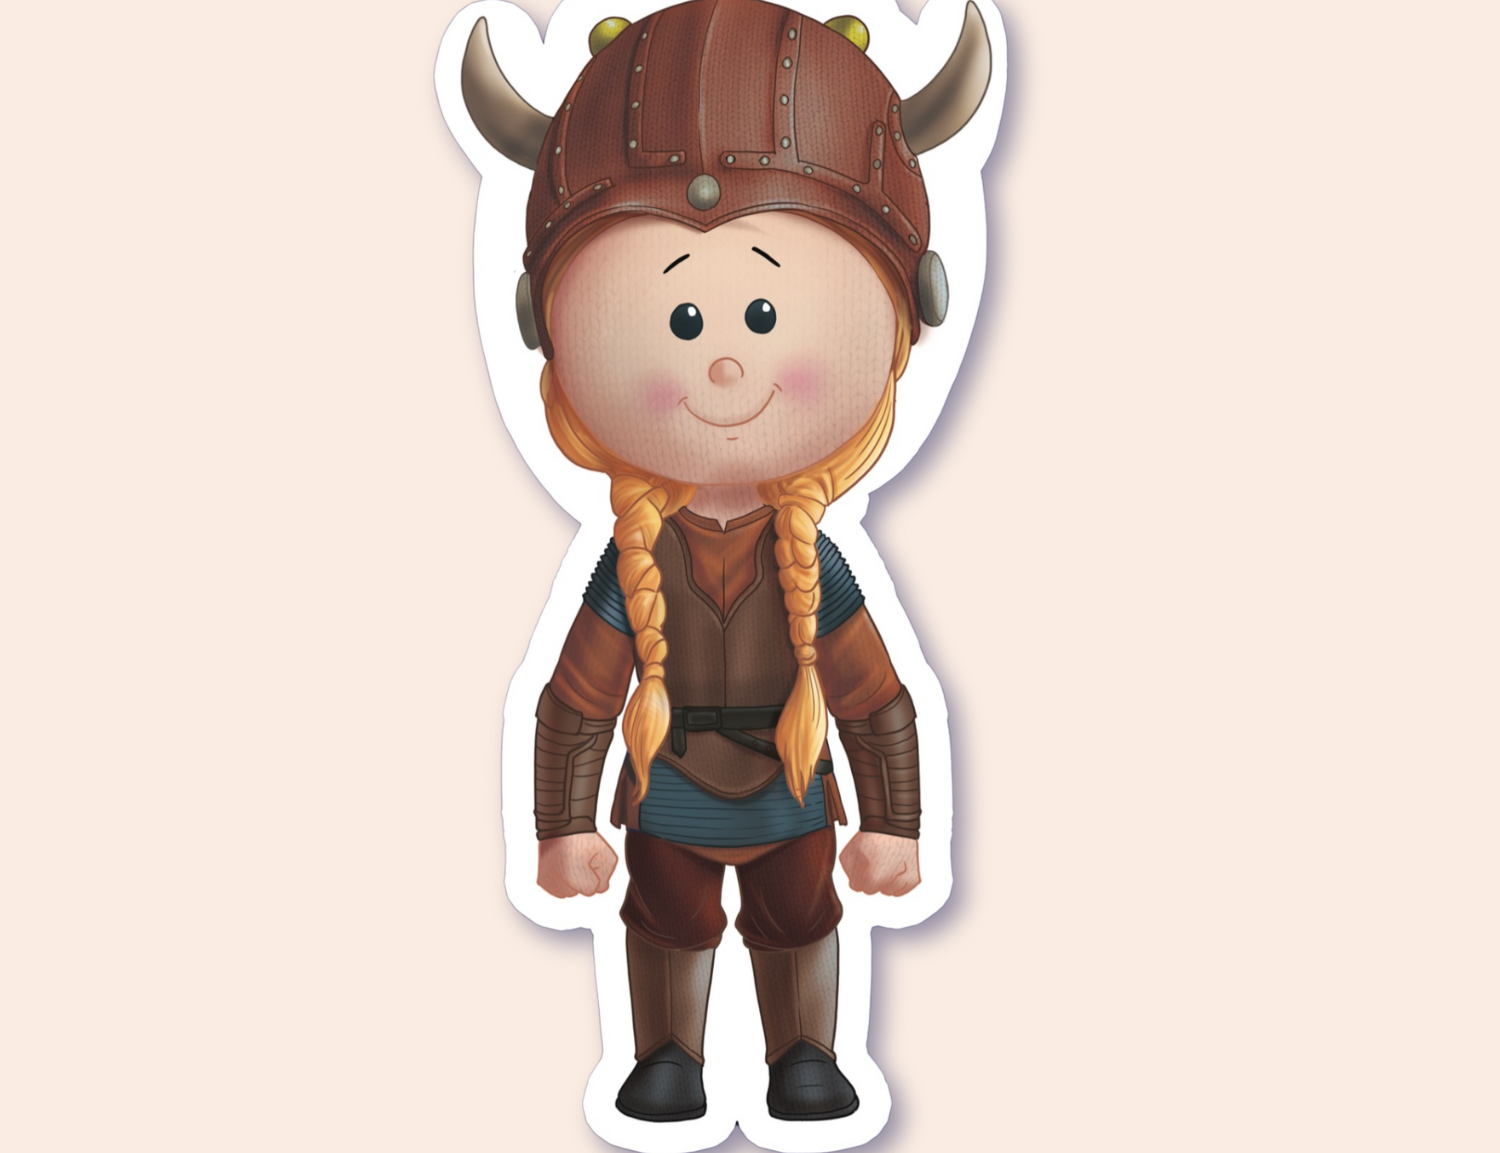 A sticker of a girl dressed as a shieldmaiden in Viking attire, complete with a brown helmet adorned with horns.